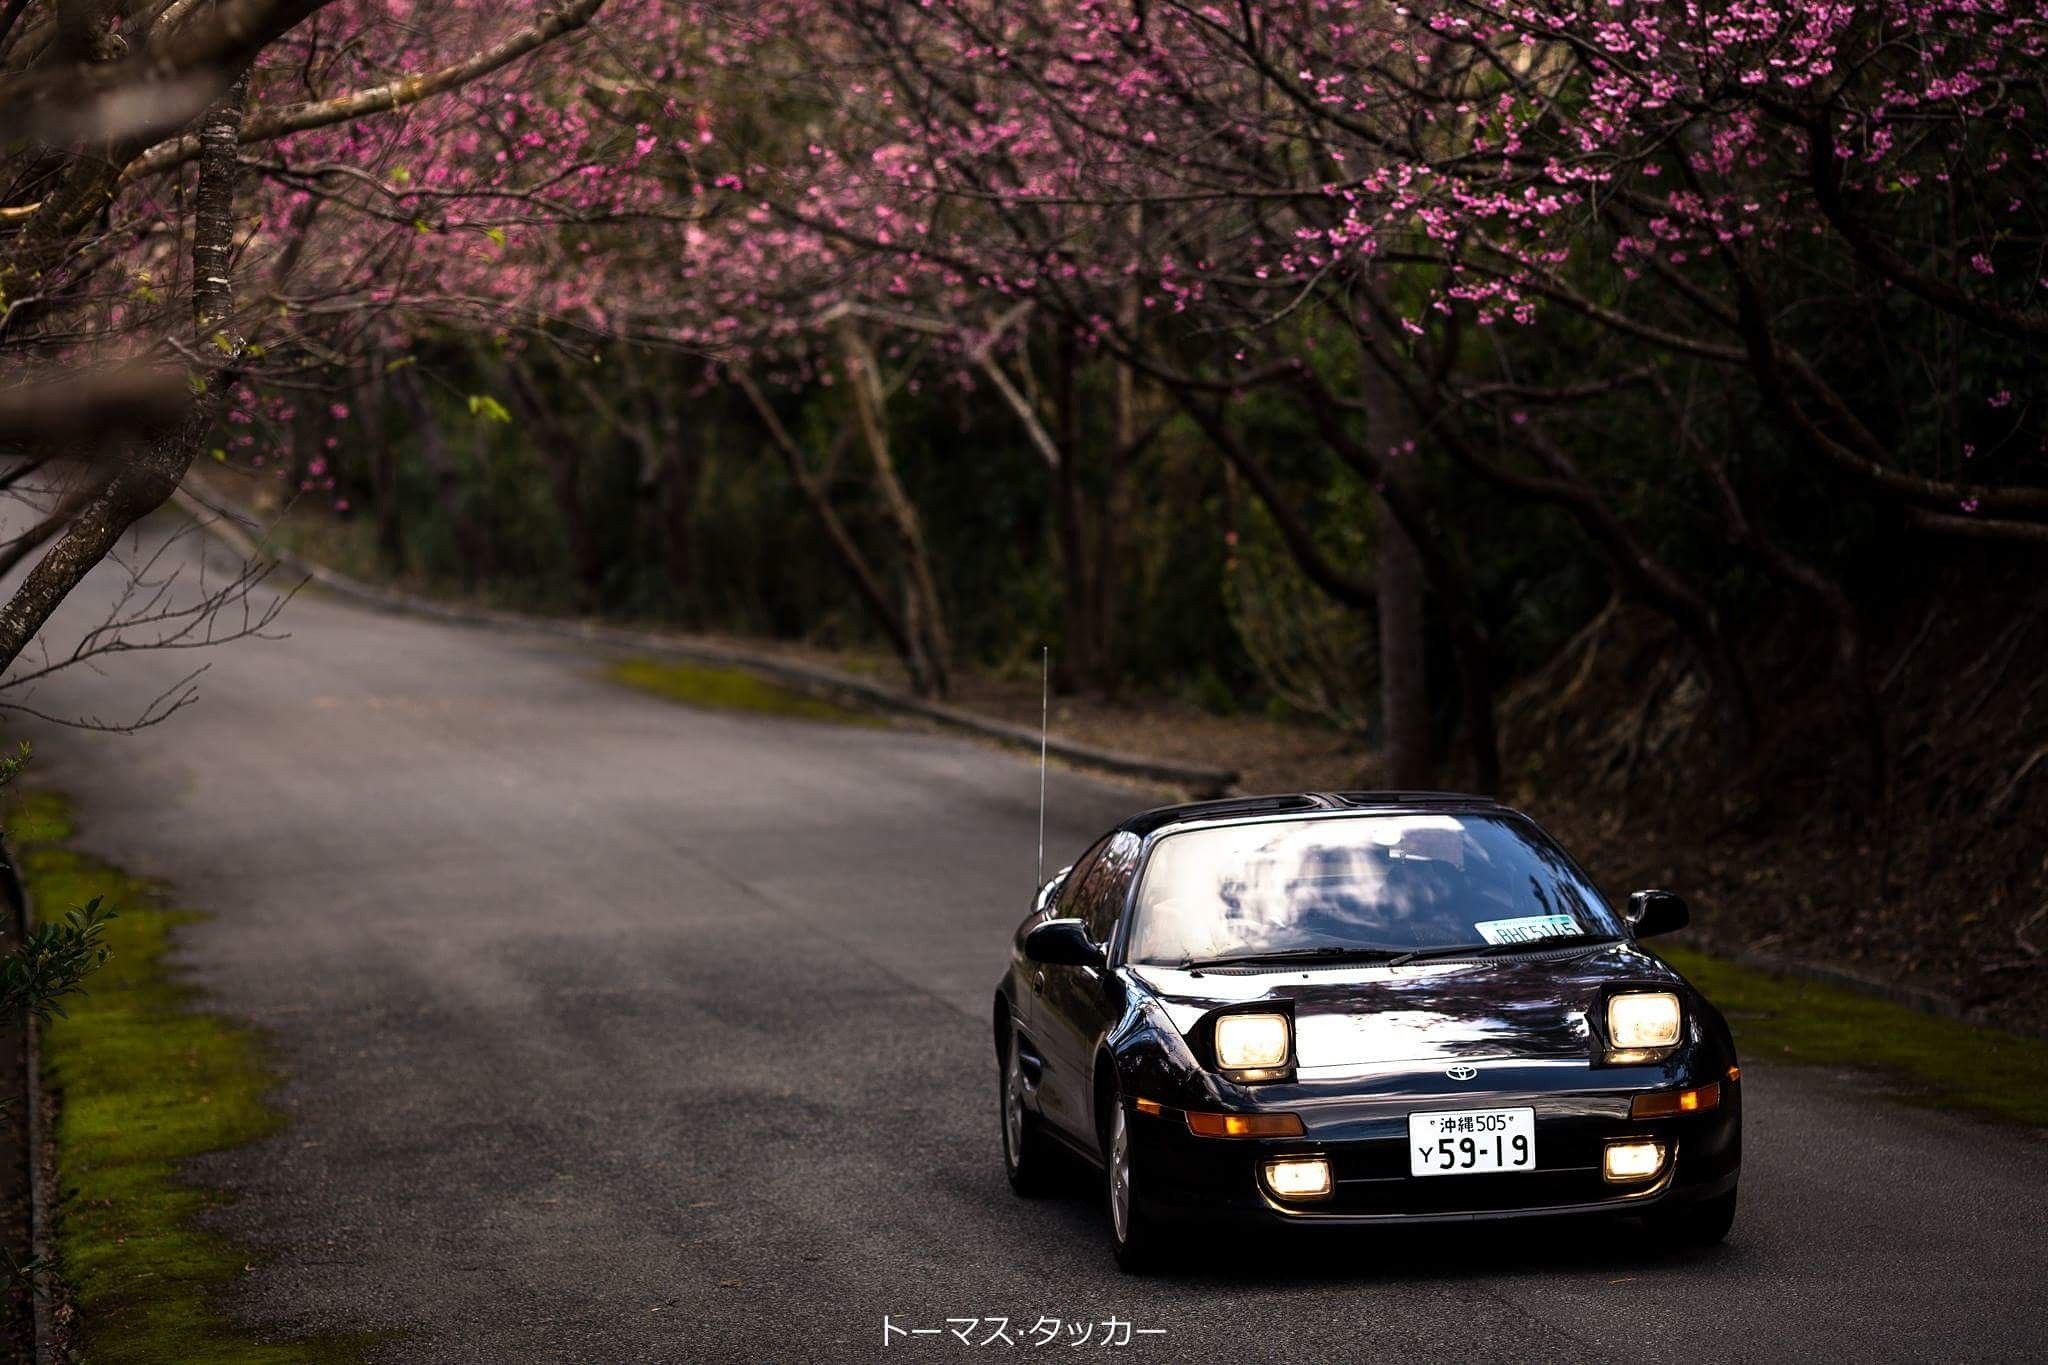 Sw20 Mr2 Gt S Okinawa HD Wallpaper From Gallsource